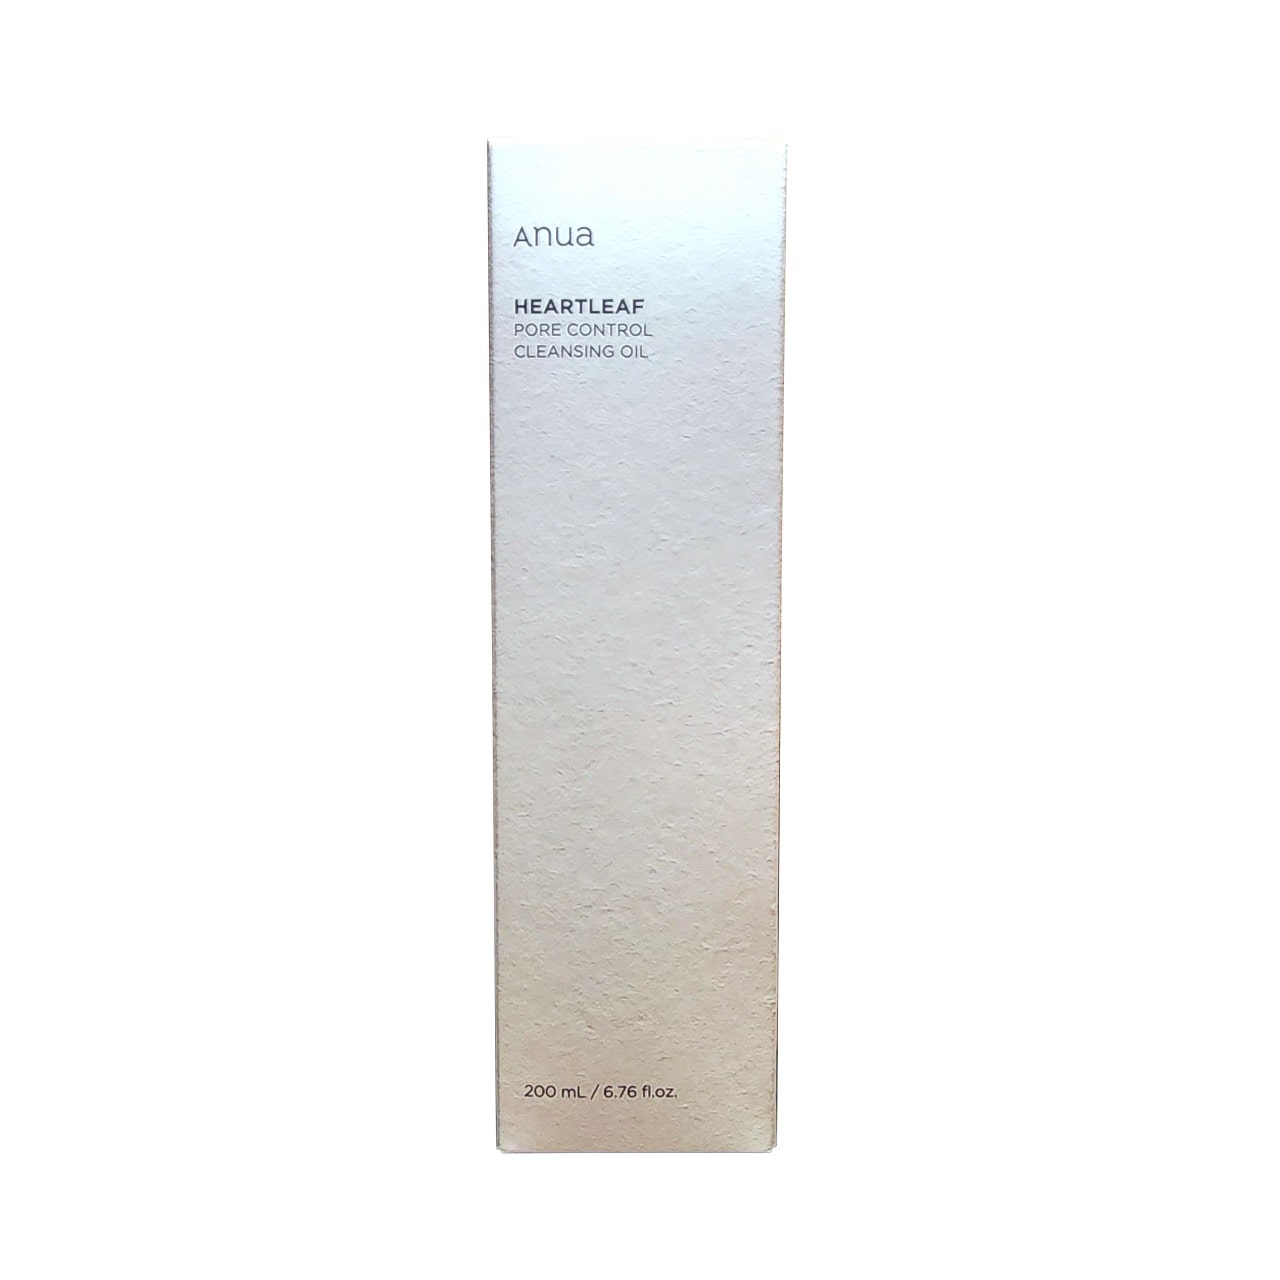 Product label for Anua Heartleaf Pore Control Cleansing Oil (200 mL)